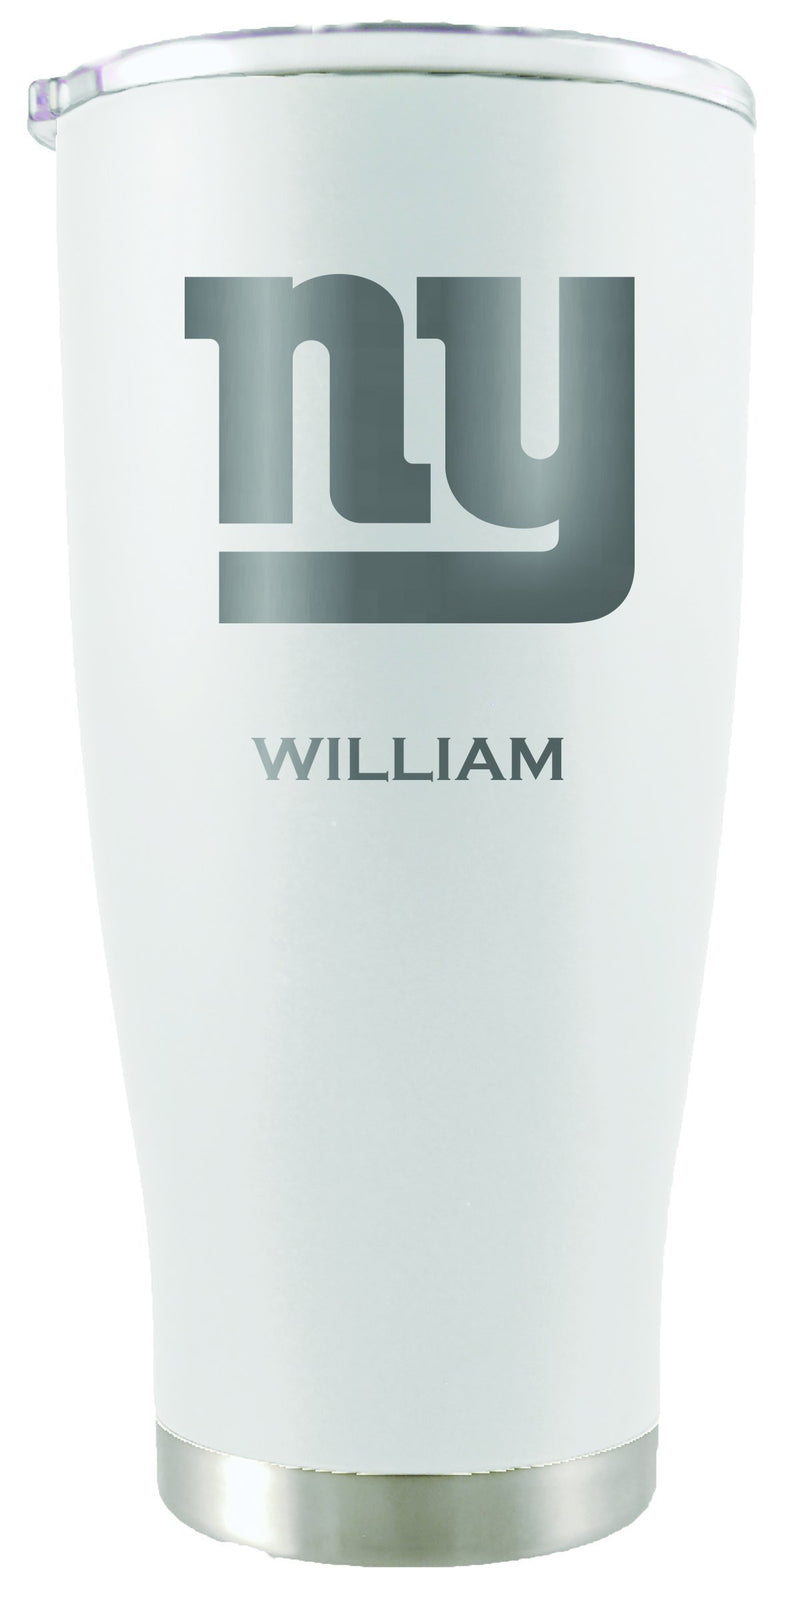 20oz White Personalized Stainless Steel Tumbler | New York Giants
20oz, CurrentProduct, Drinkware_category_All, New York Giants, NFL, NYG, Personalized_Personalized
The Memory Company